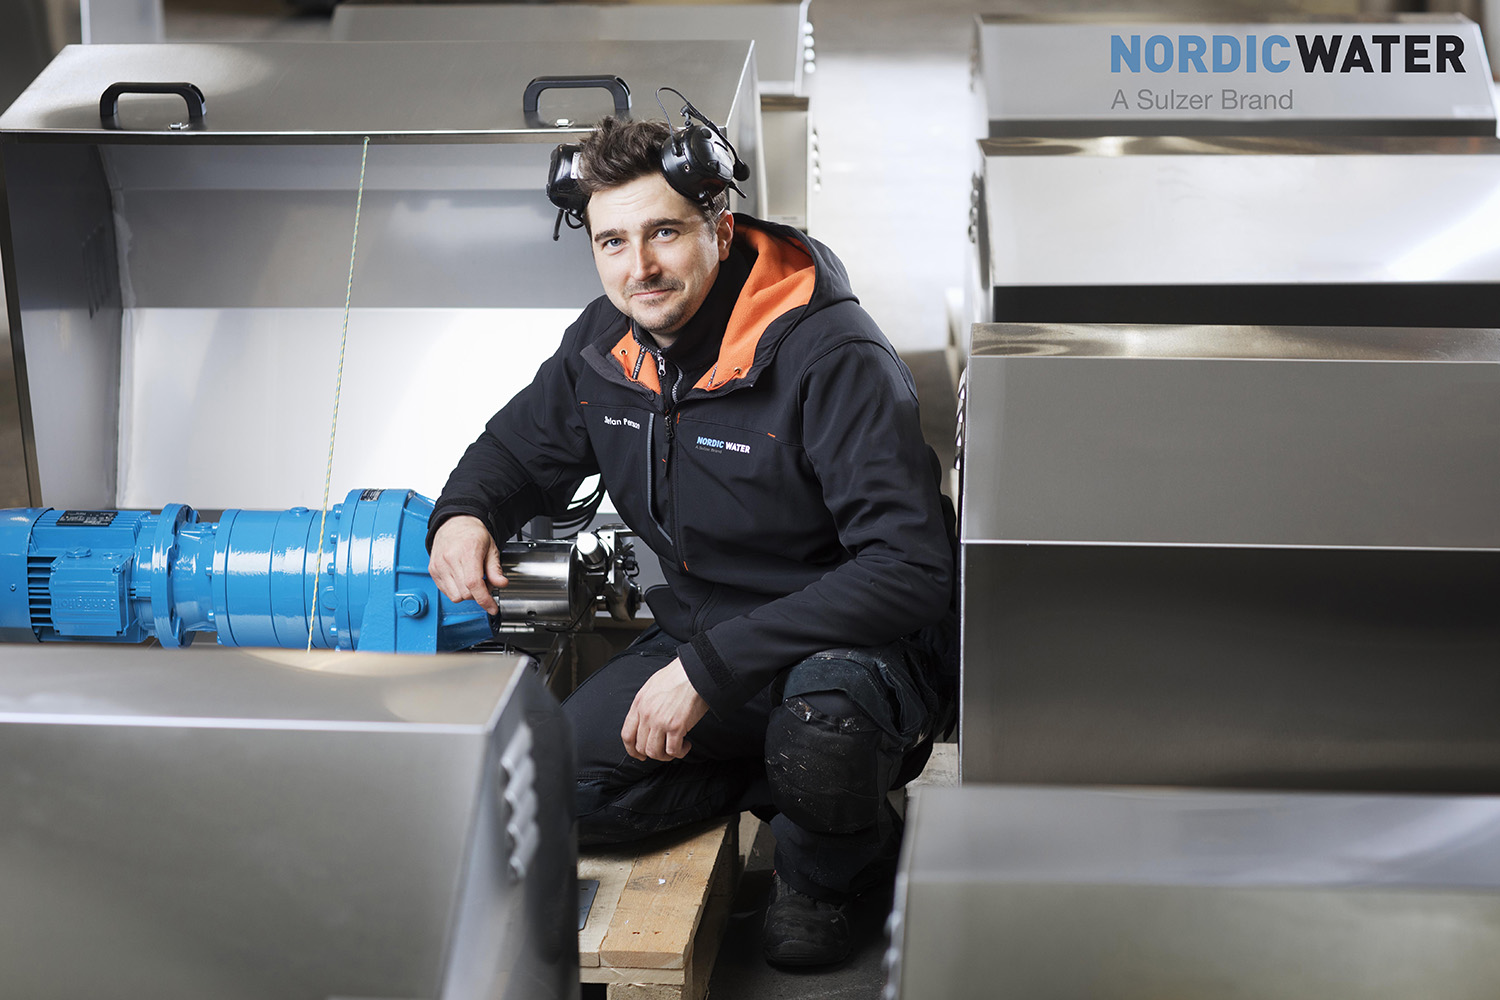 Nordic Water is now a Sulzer brand. Image copyright Sulzer.